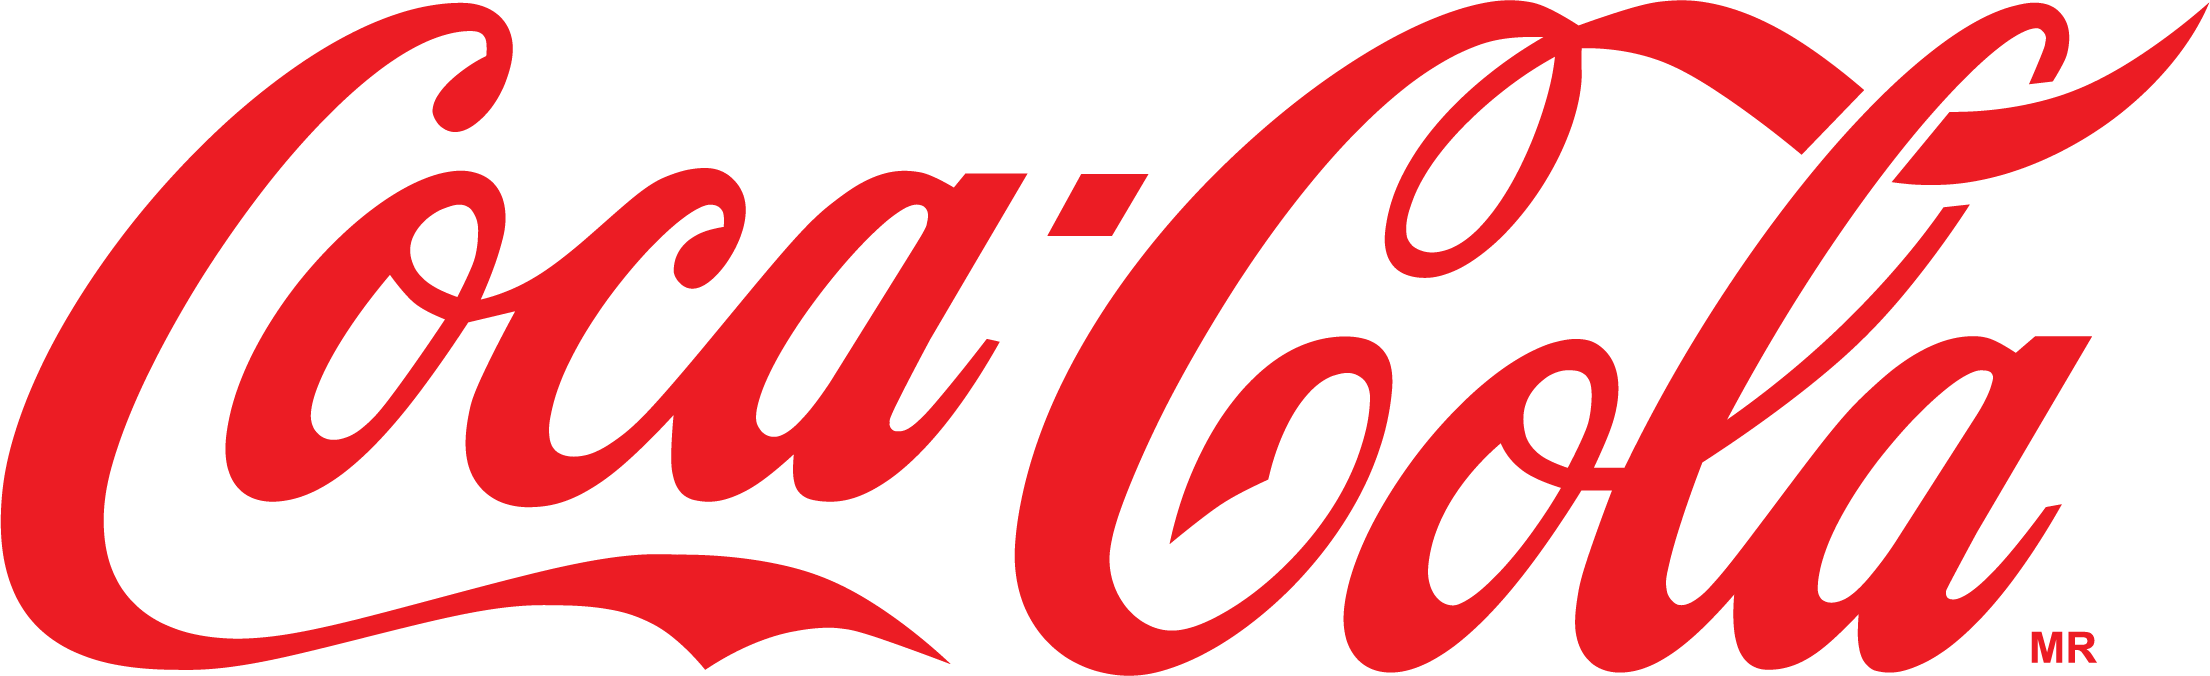 cocacola_logo_red.png